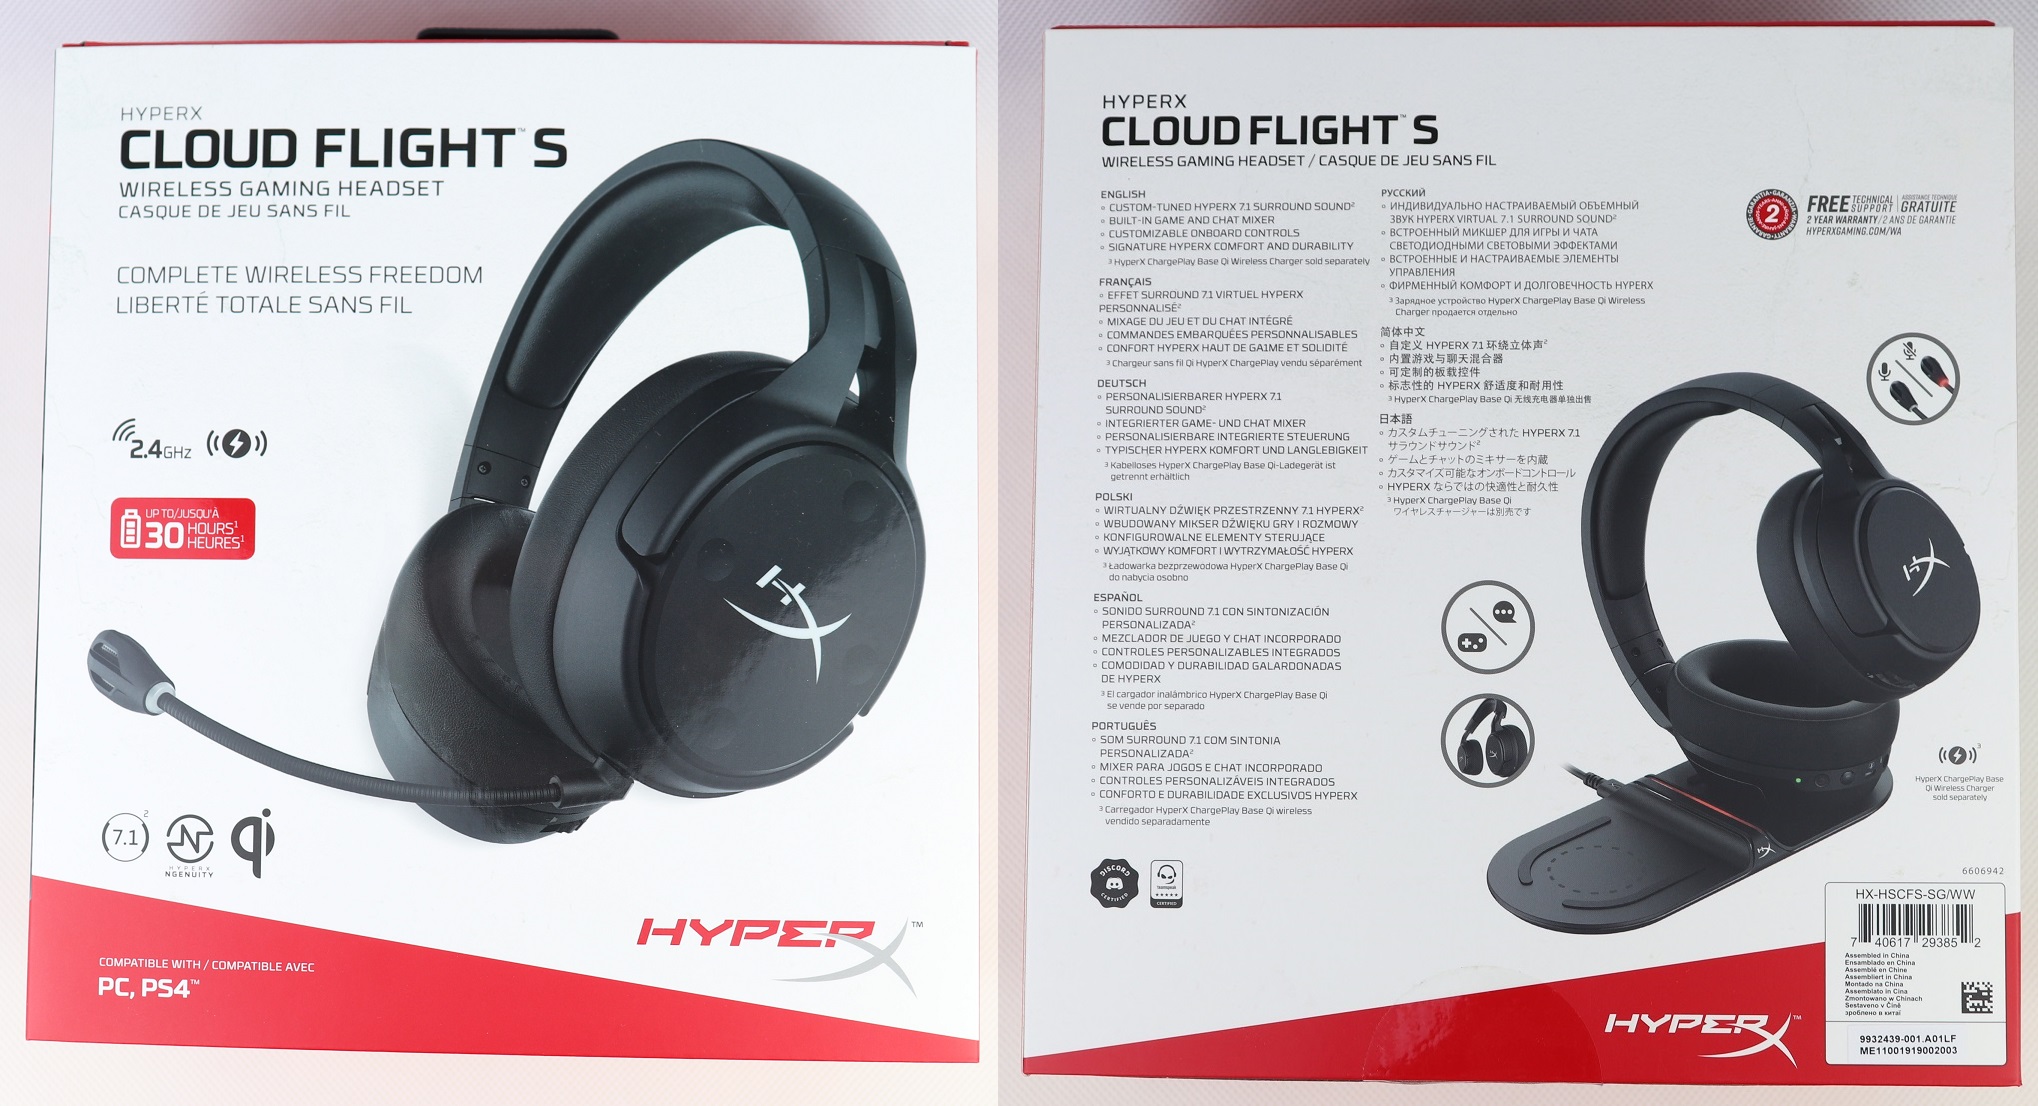 Unboxing and Review of HyperX Cloud Flight S Wireless Gaming